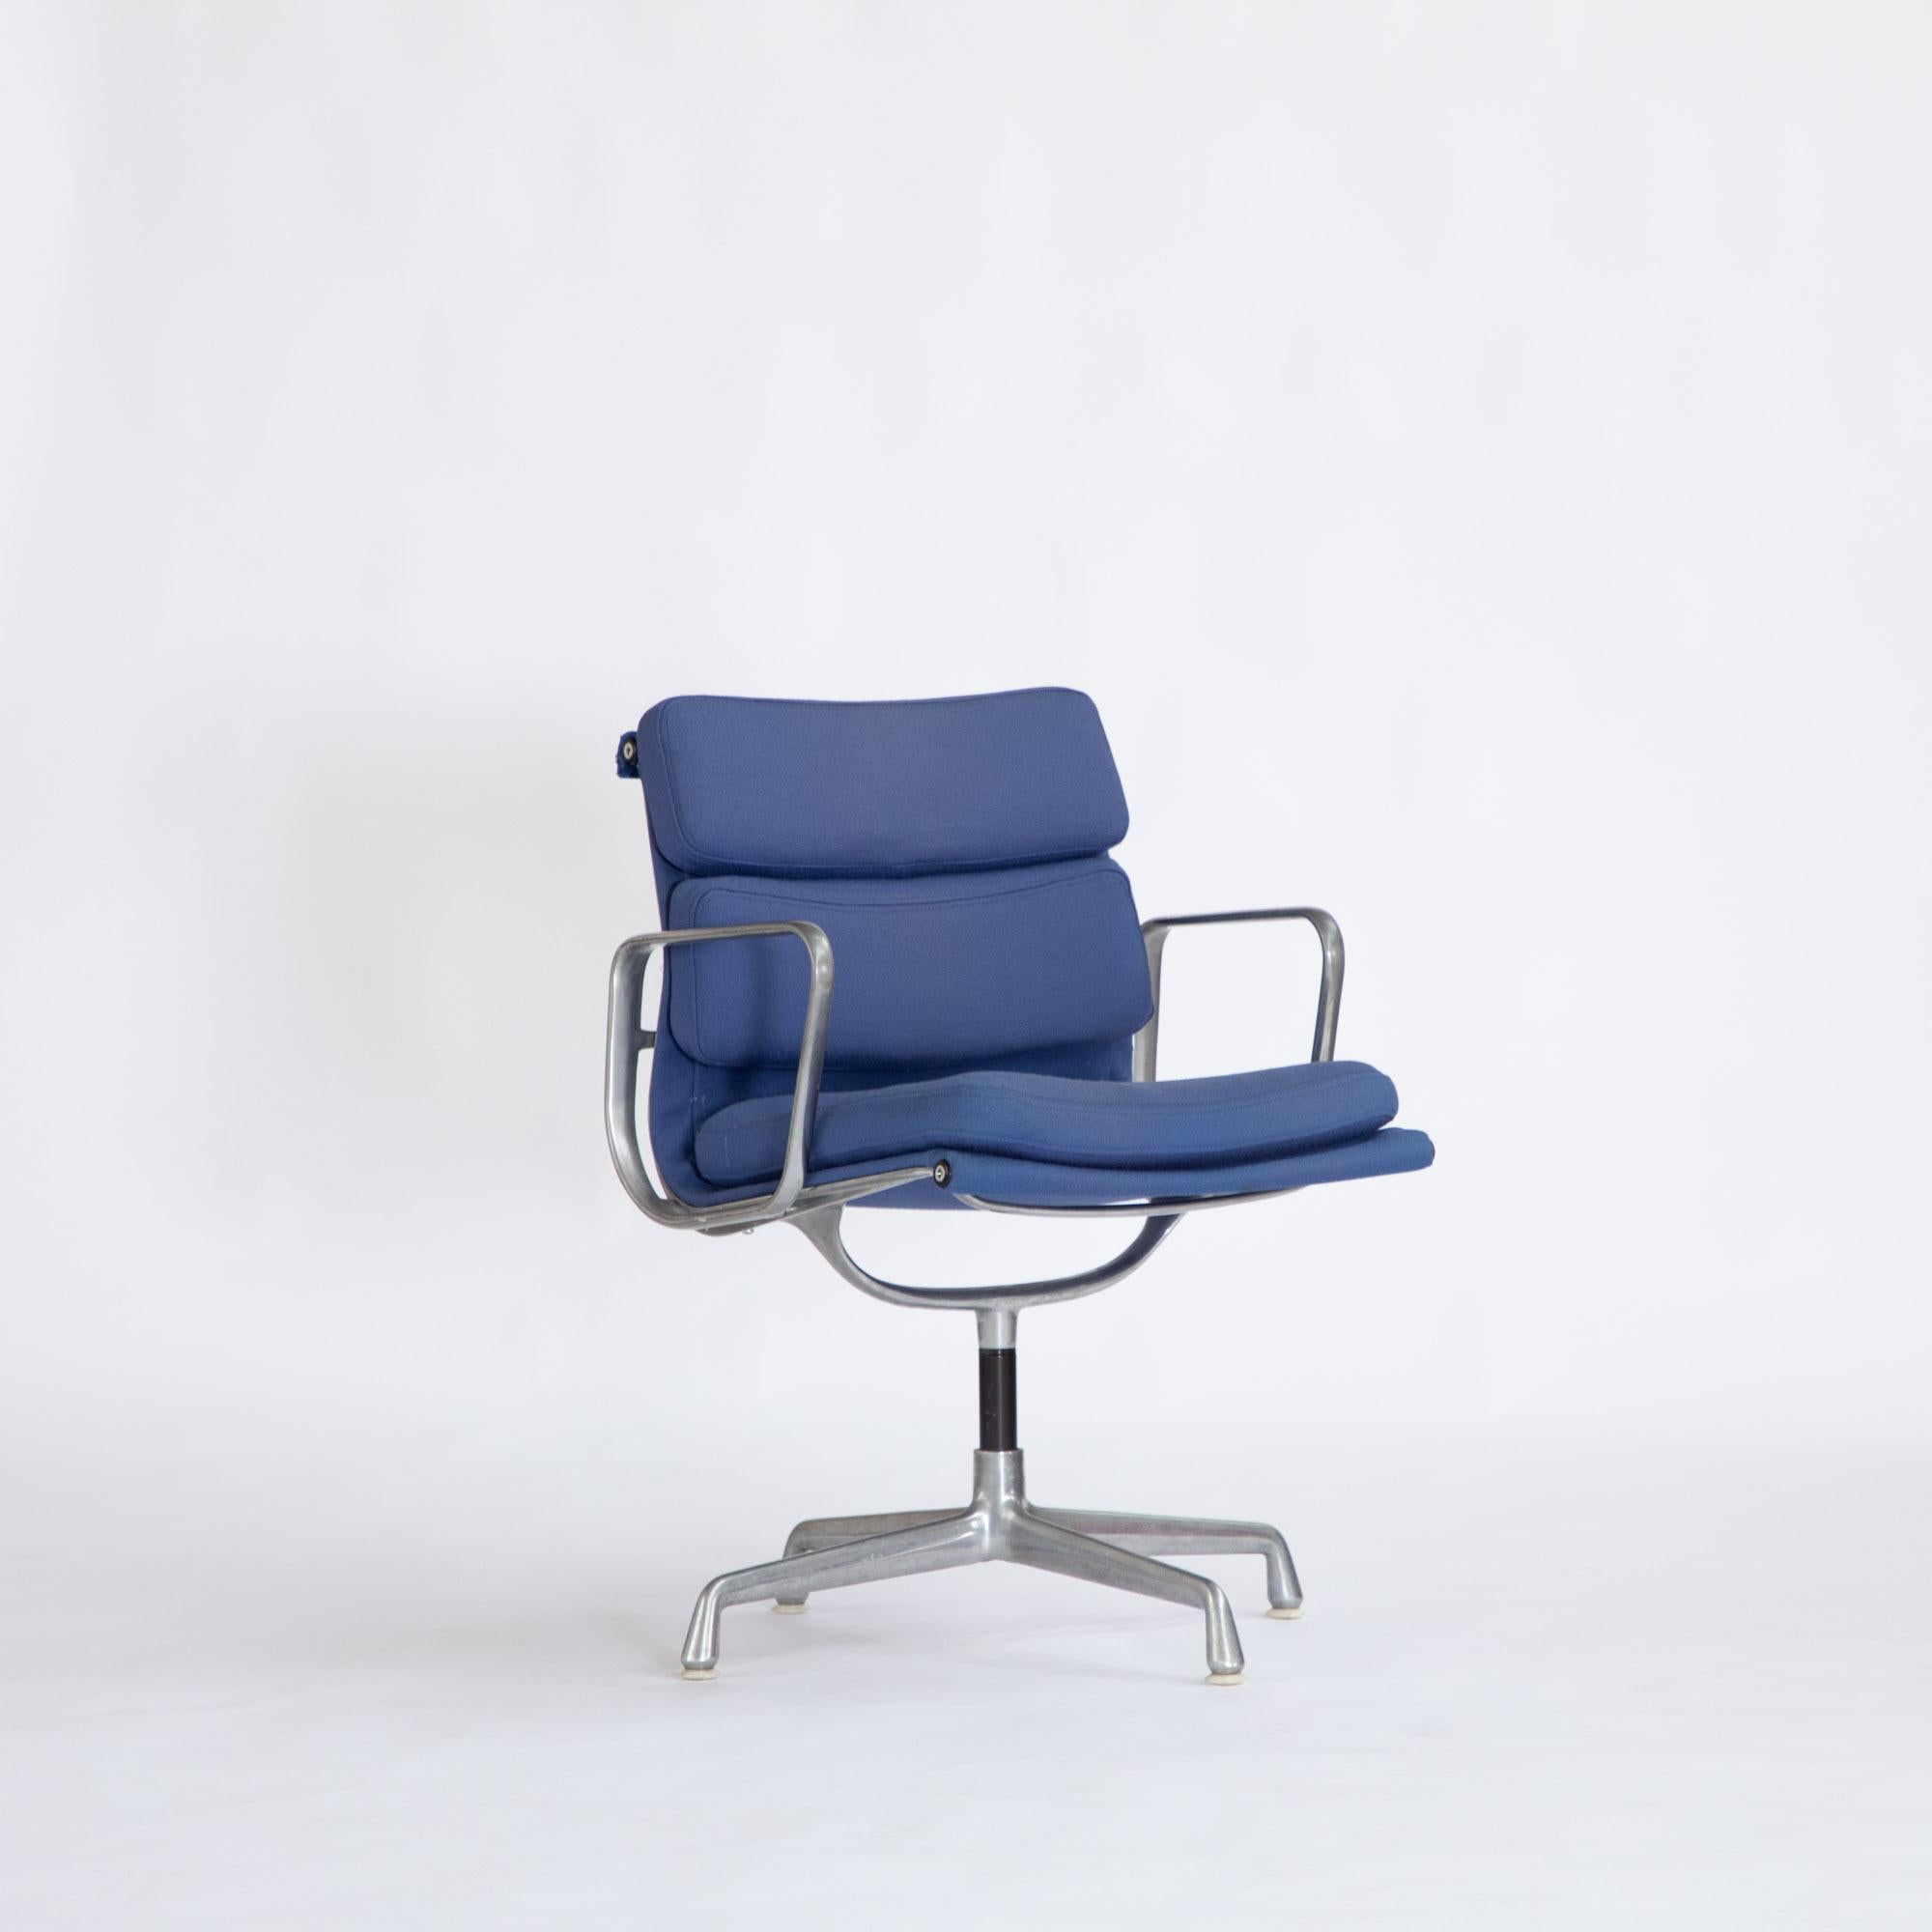 Great example of the EA208, designed by Charles and Ray Eames in 1969.
Manufactured by Herman Miller USA between 1973-75
Fixed seat height
Swivel Seat on a 4 star aluminium frame. Some light wear to the frame consistent with age.
The original